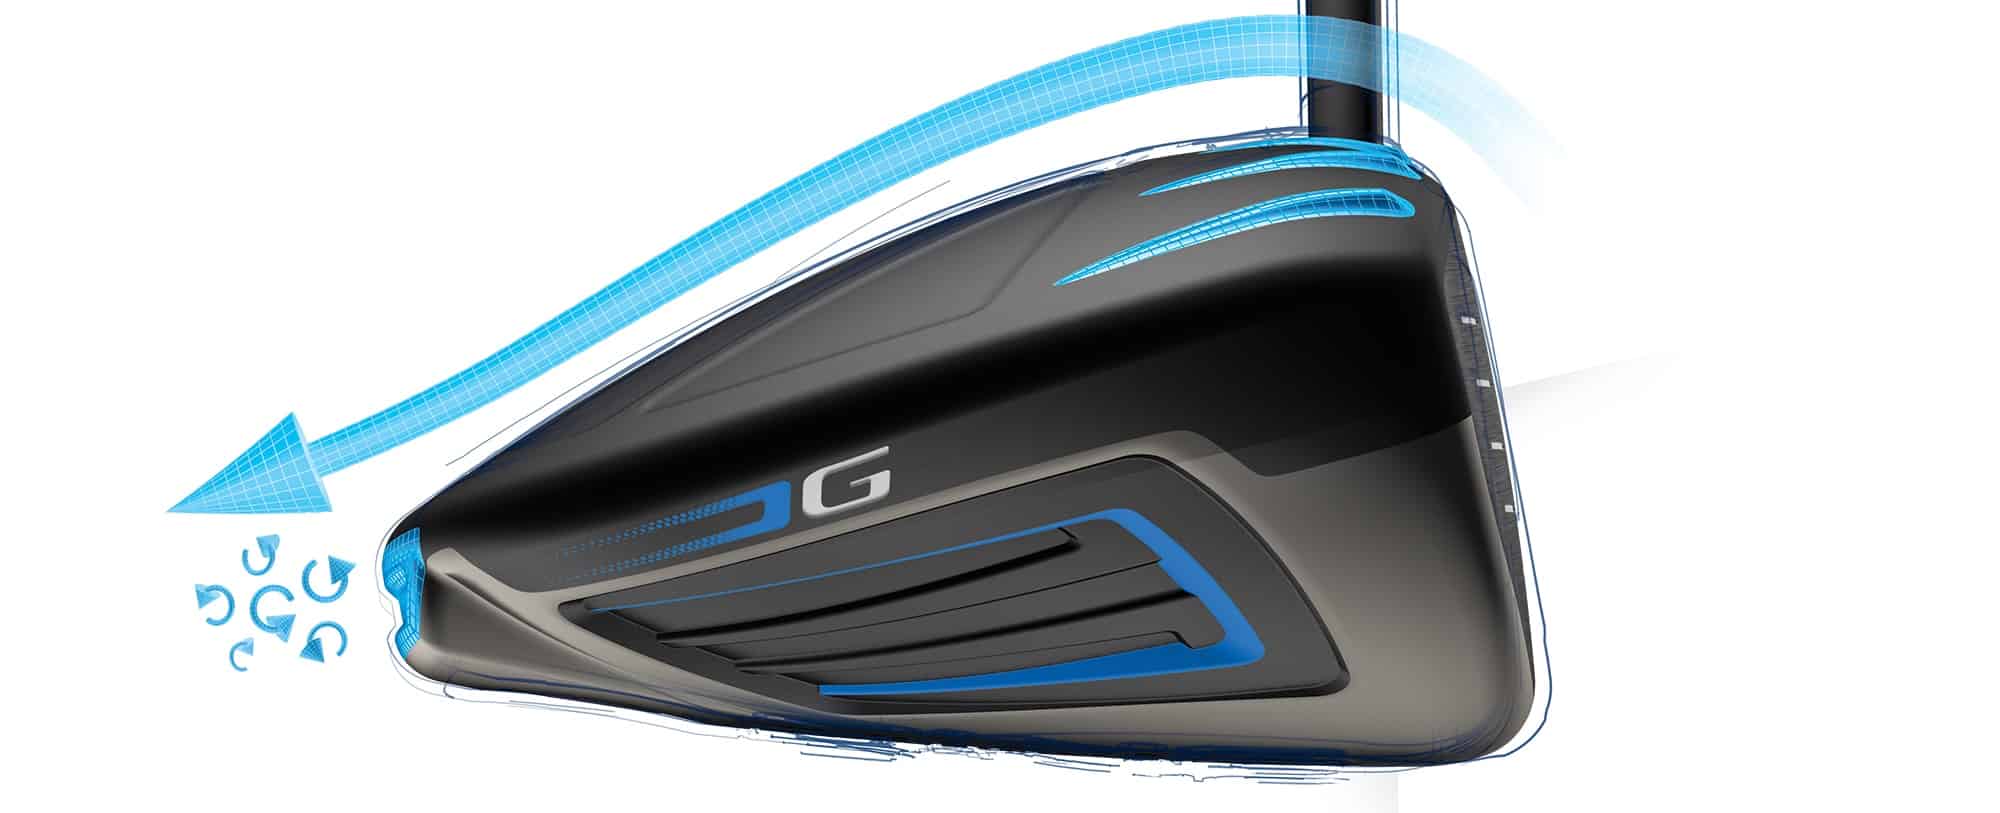 PING G Driver Review